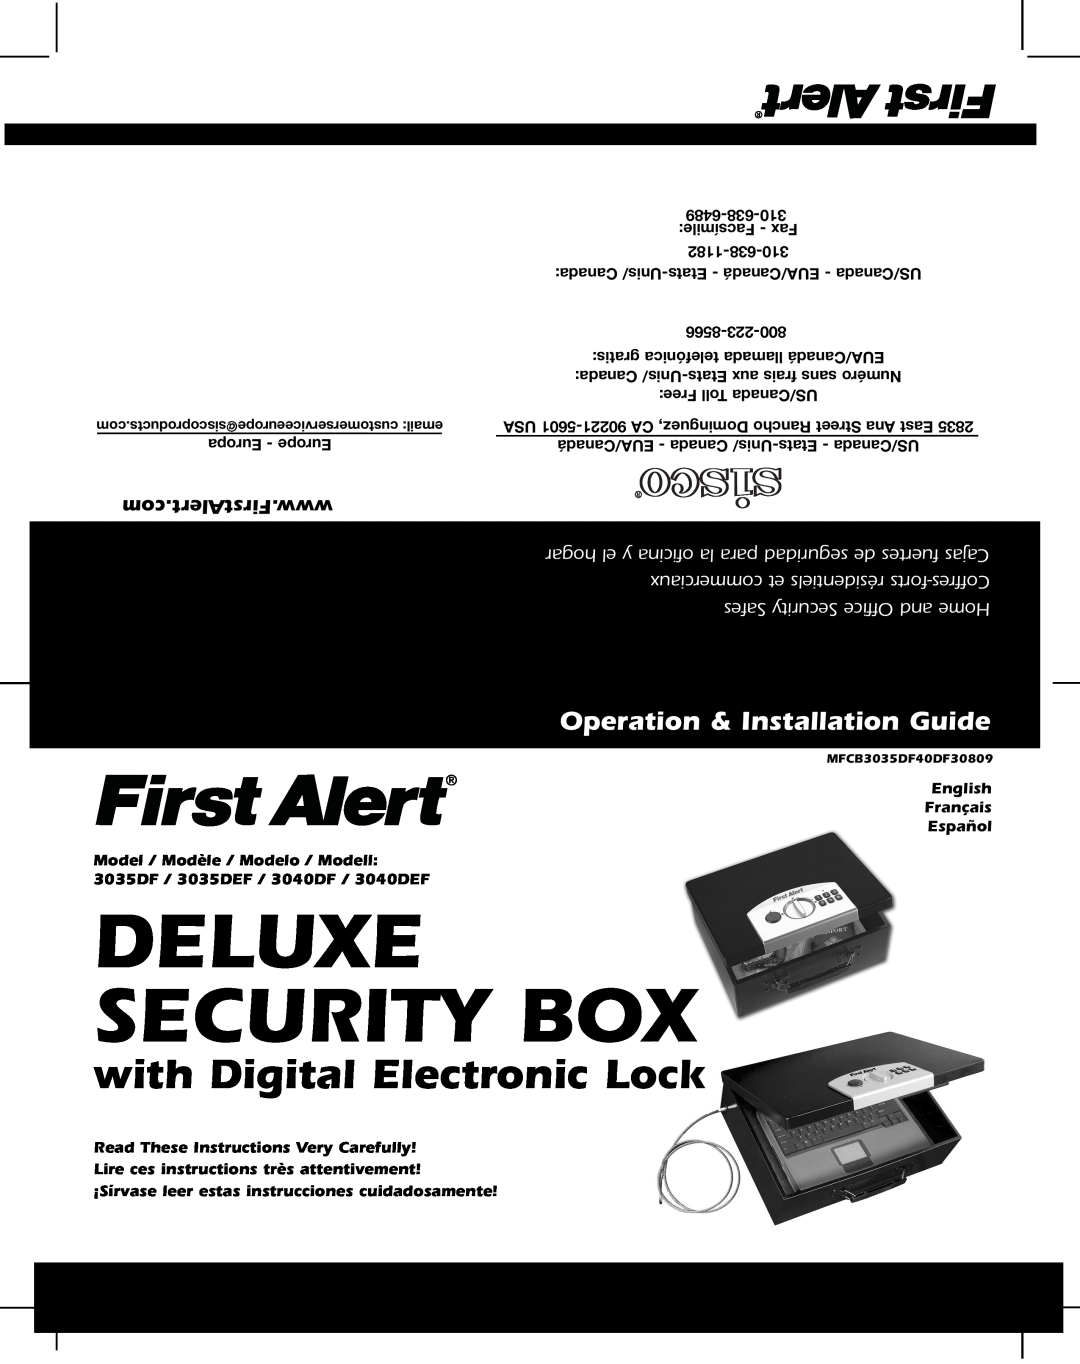 First Alert 3035DEF, 3040DF manual Deluxe Security Box, with Digital Electronic Lock, Operation & Installation Guide 